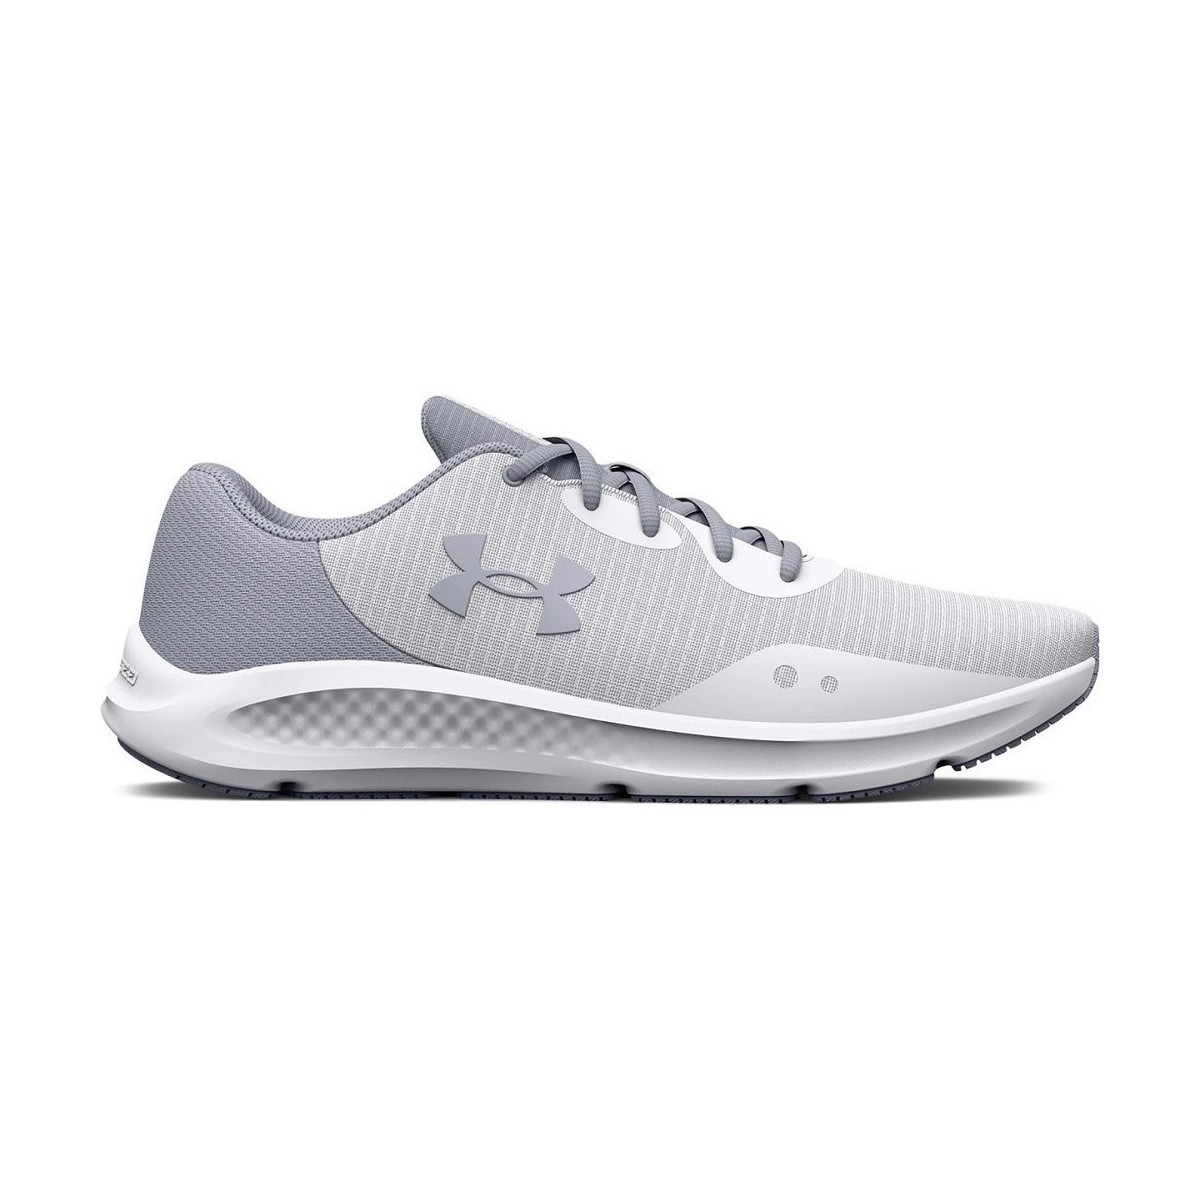 Under Armour Charged Pursuit 3 Tech Grey